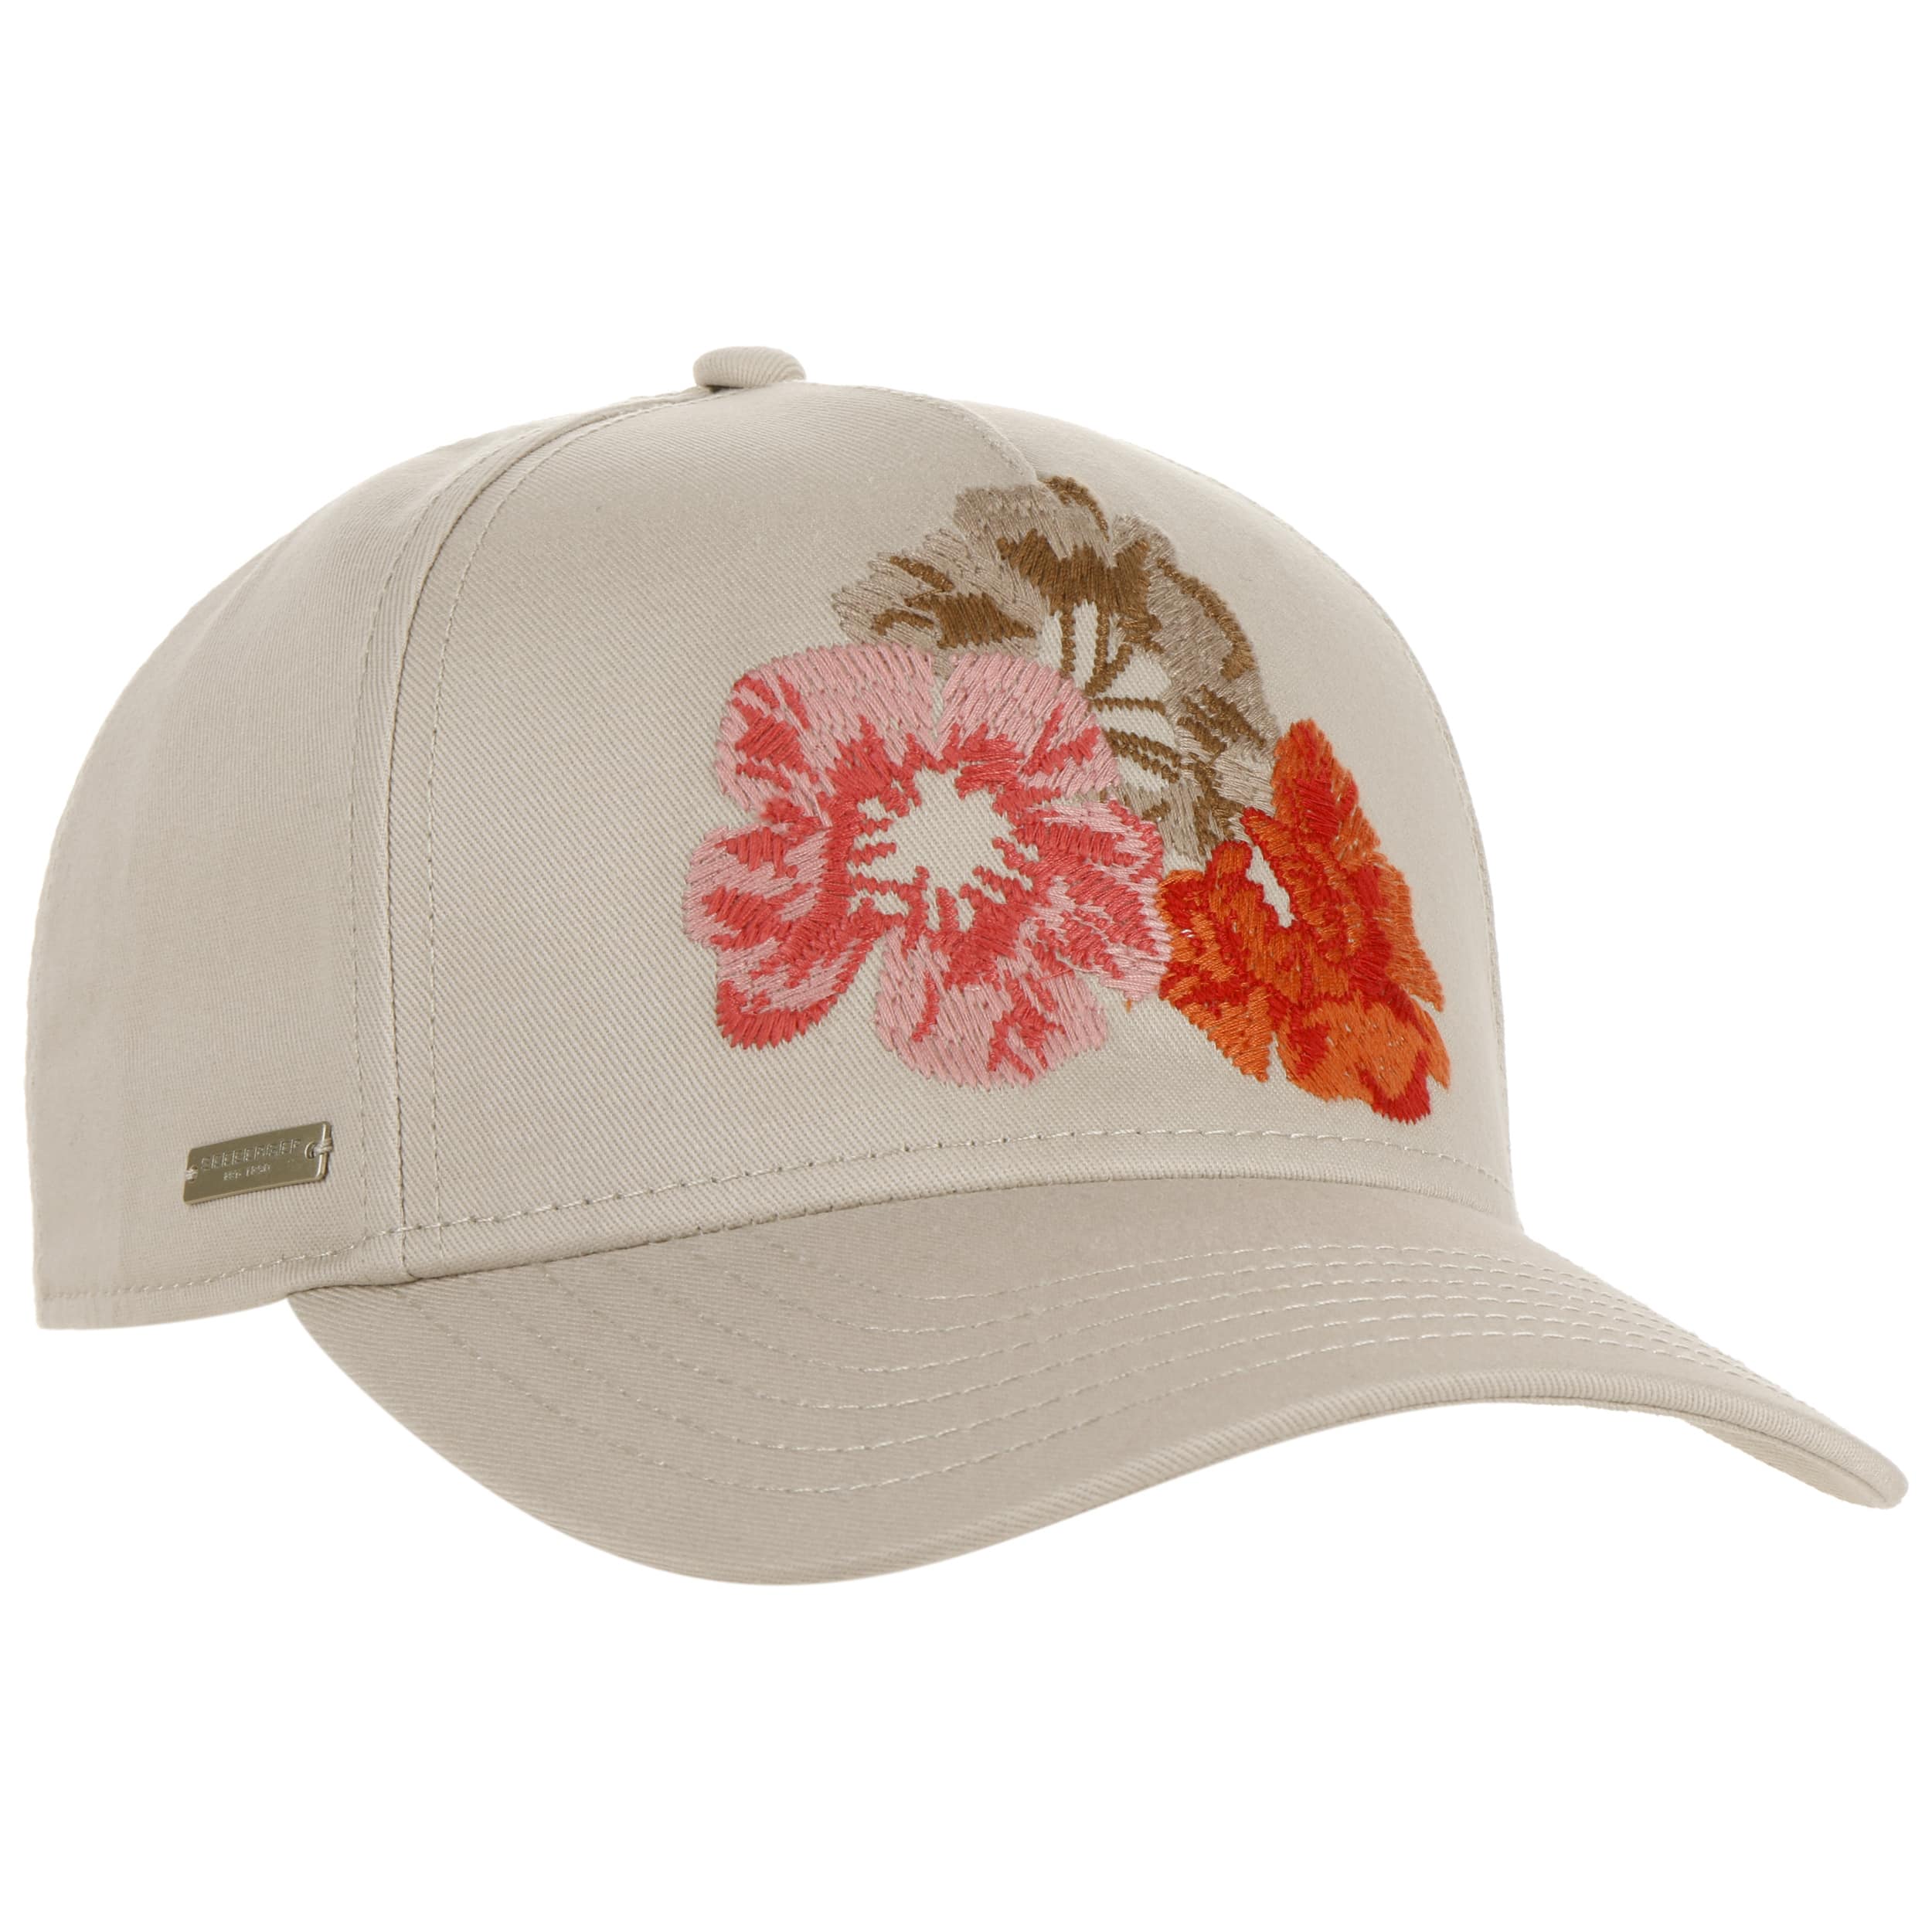 Stitched Flowers Cap - € Seeberger by 29,95